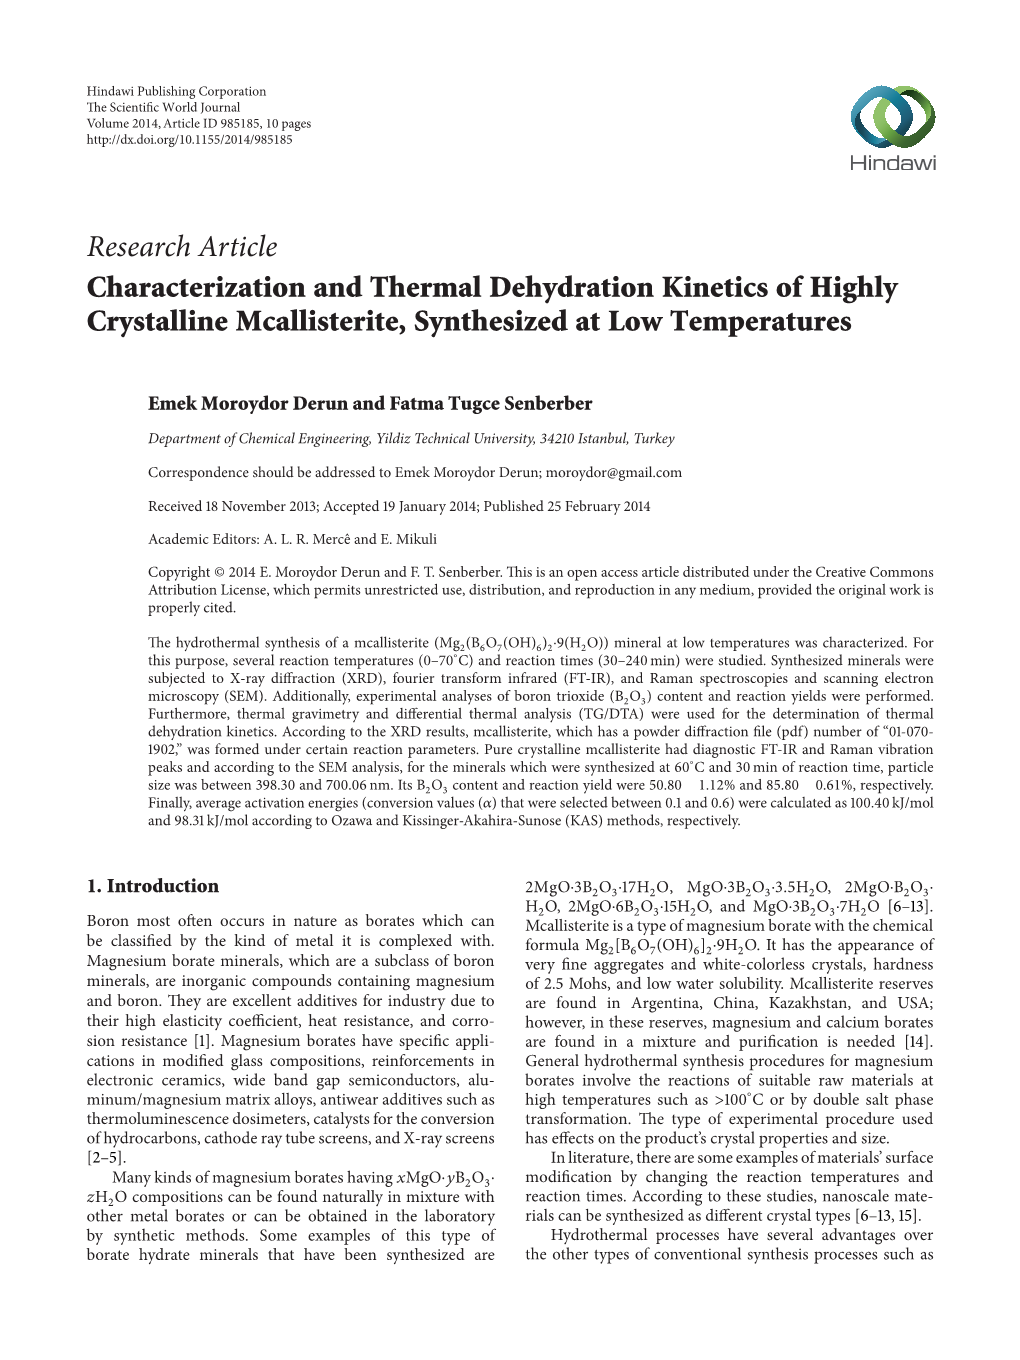 Characterization and Thermal Dehydration Kinetics of Highly Crystalline Mcallisterite, Synthesized at Low Temperatures